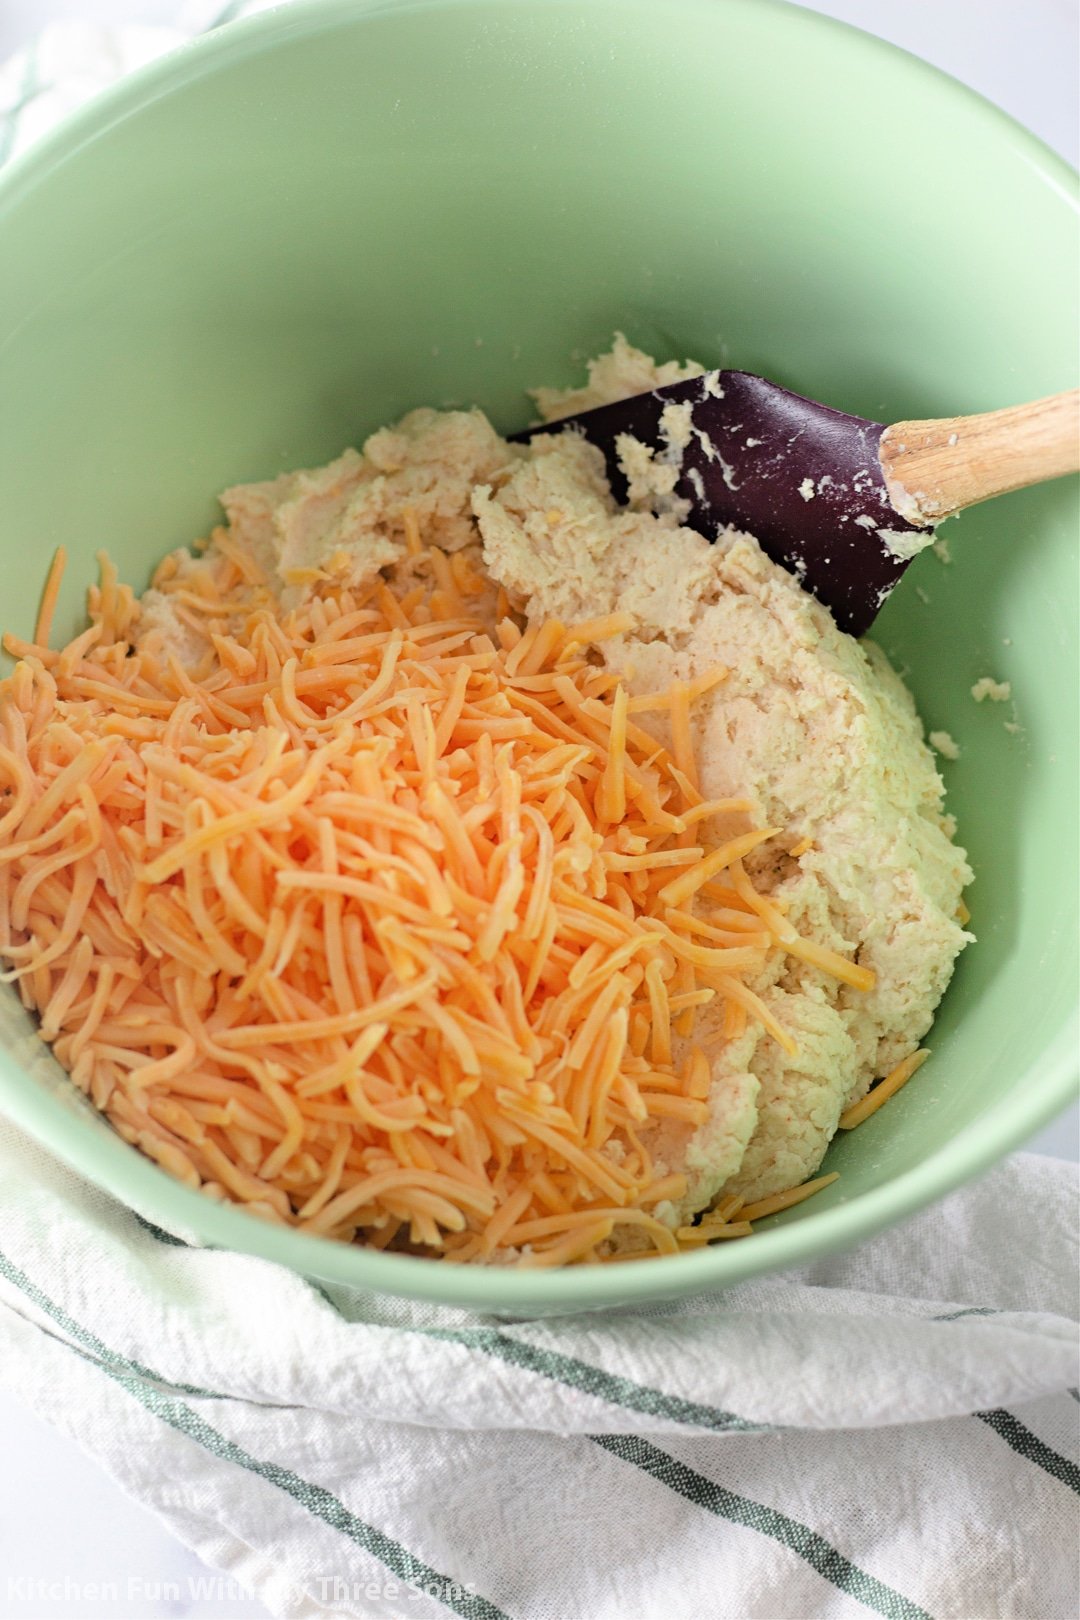 Shredded cheddar cheese added to a mixing bowl of biscuit dough.